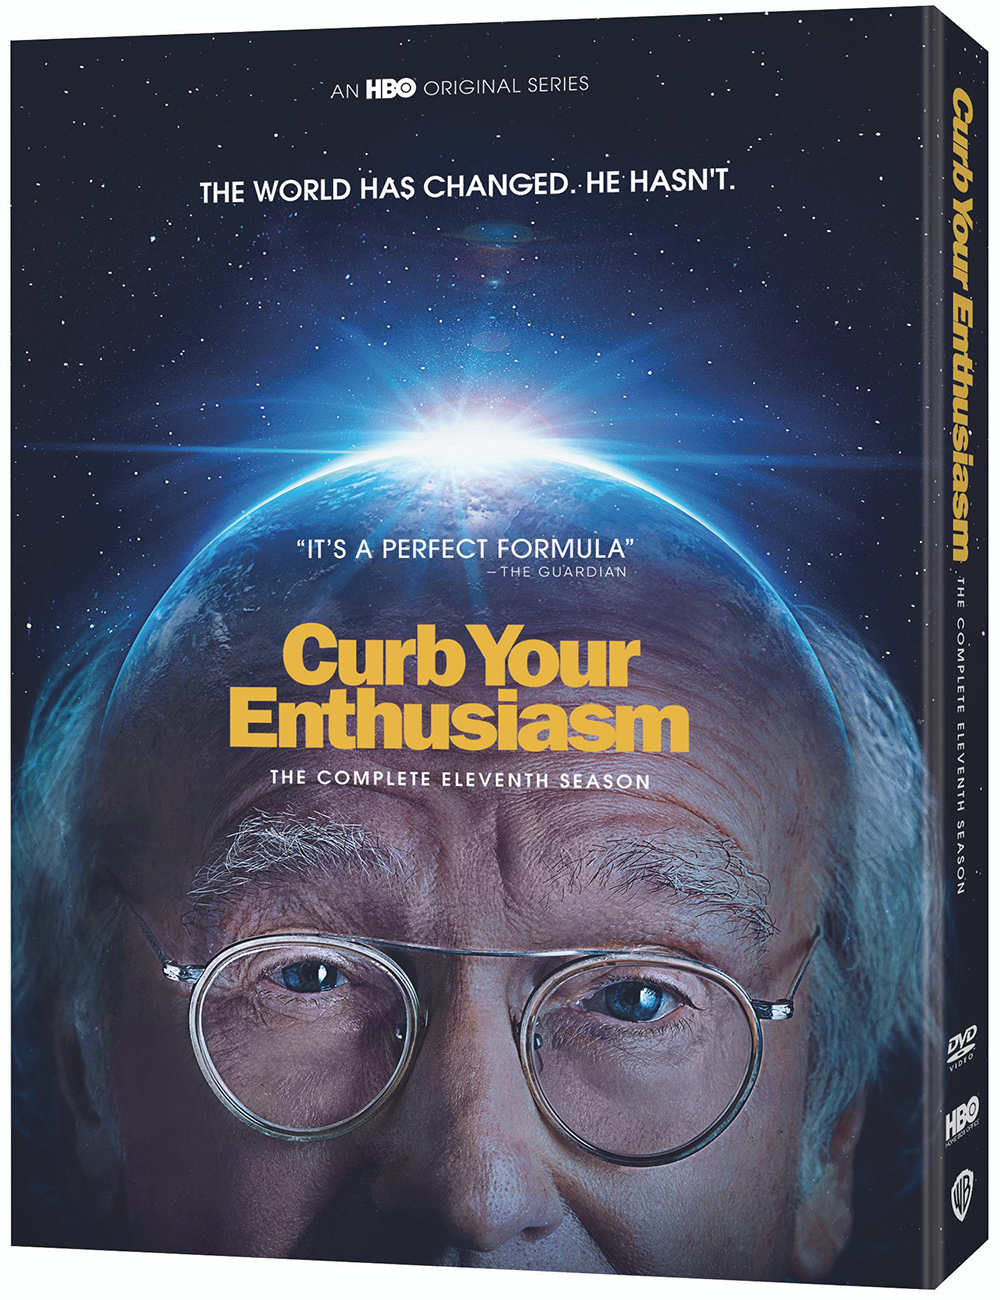 'Curb Your Enthusiasm: The Complete Eleventh Season'